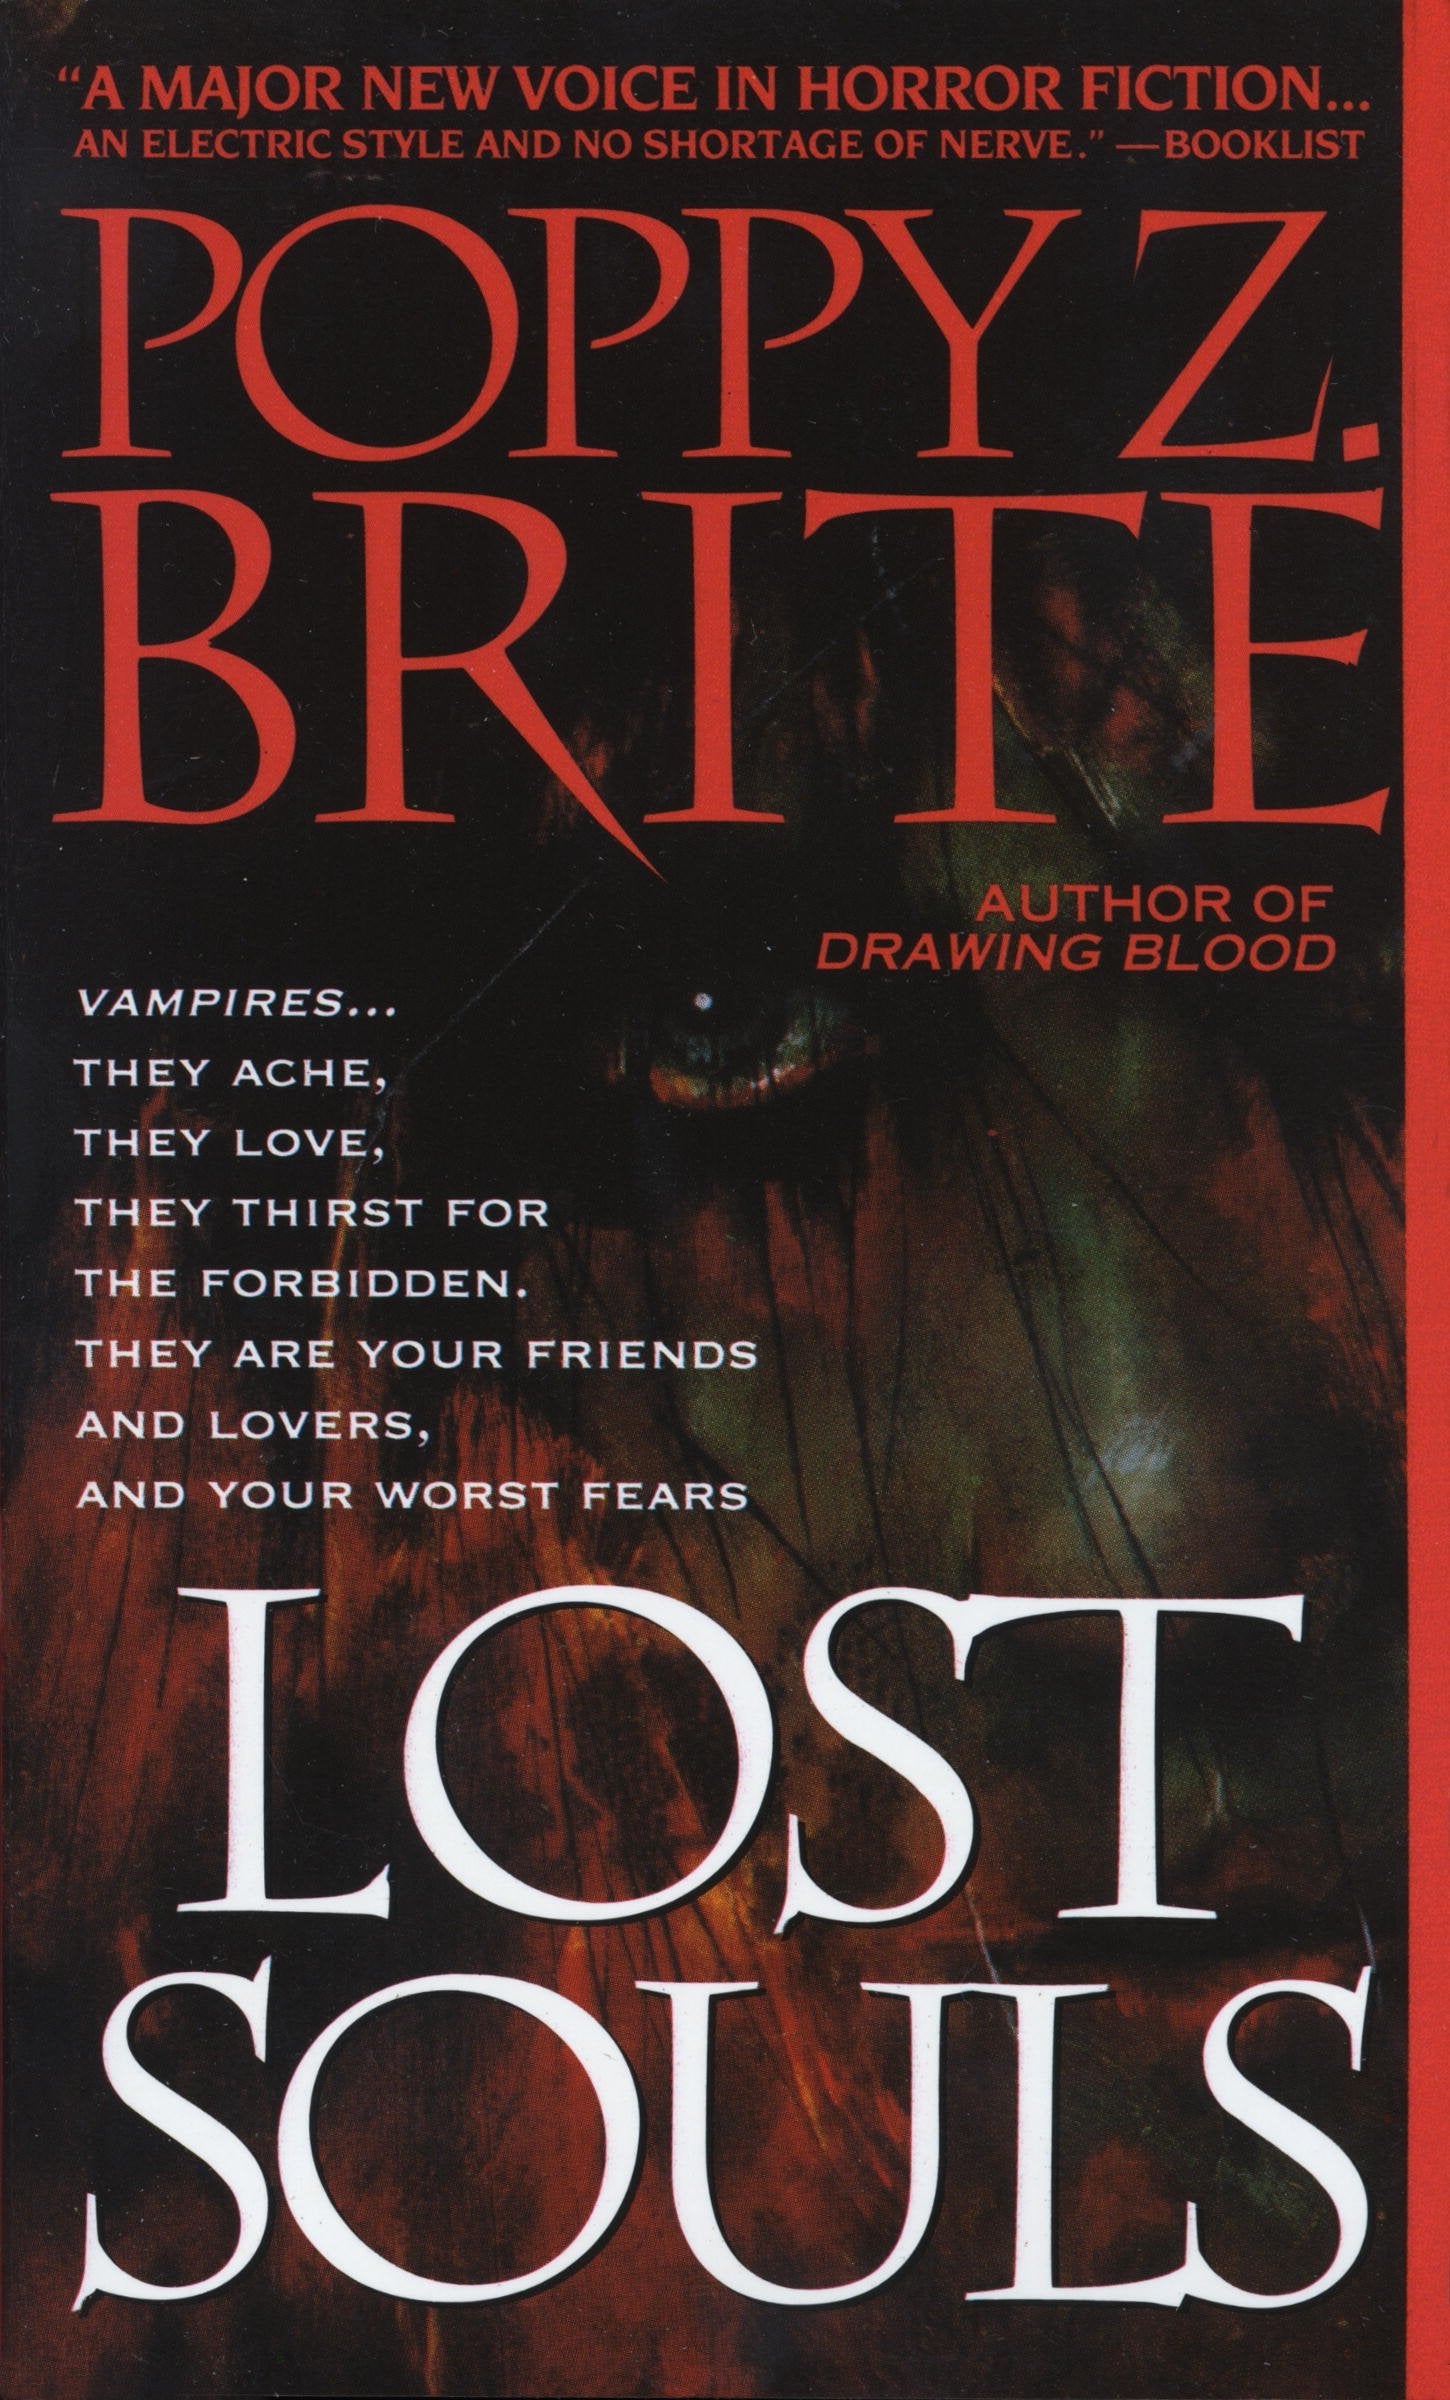 Lost Souls by Poppy Z Brite- Review by Sara M